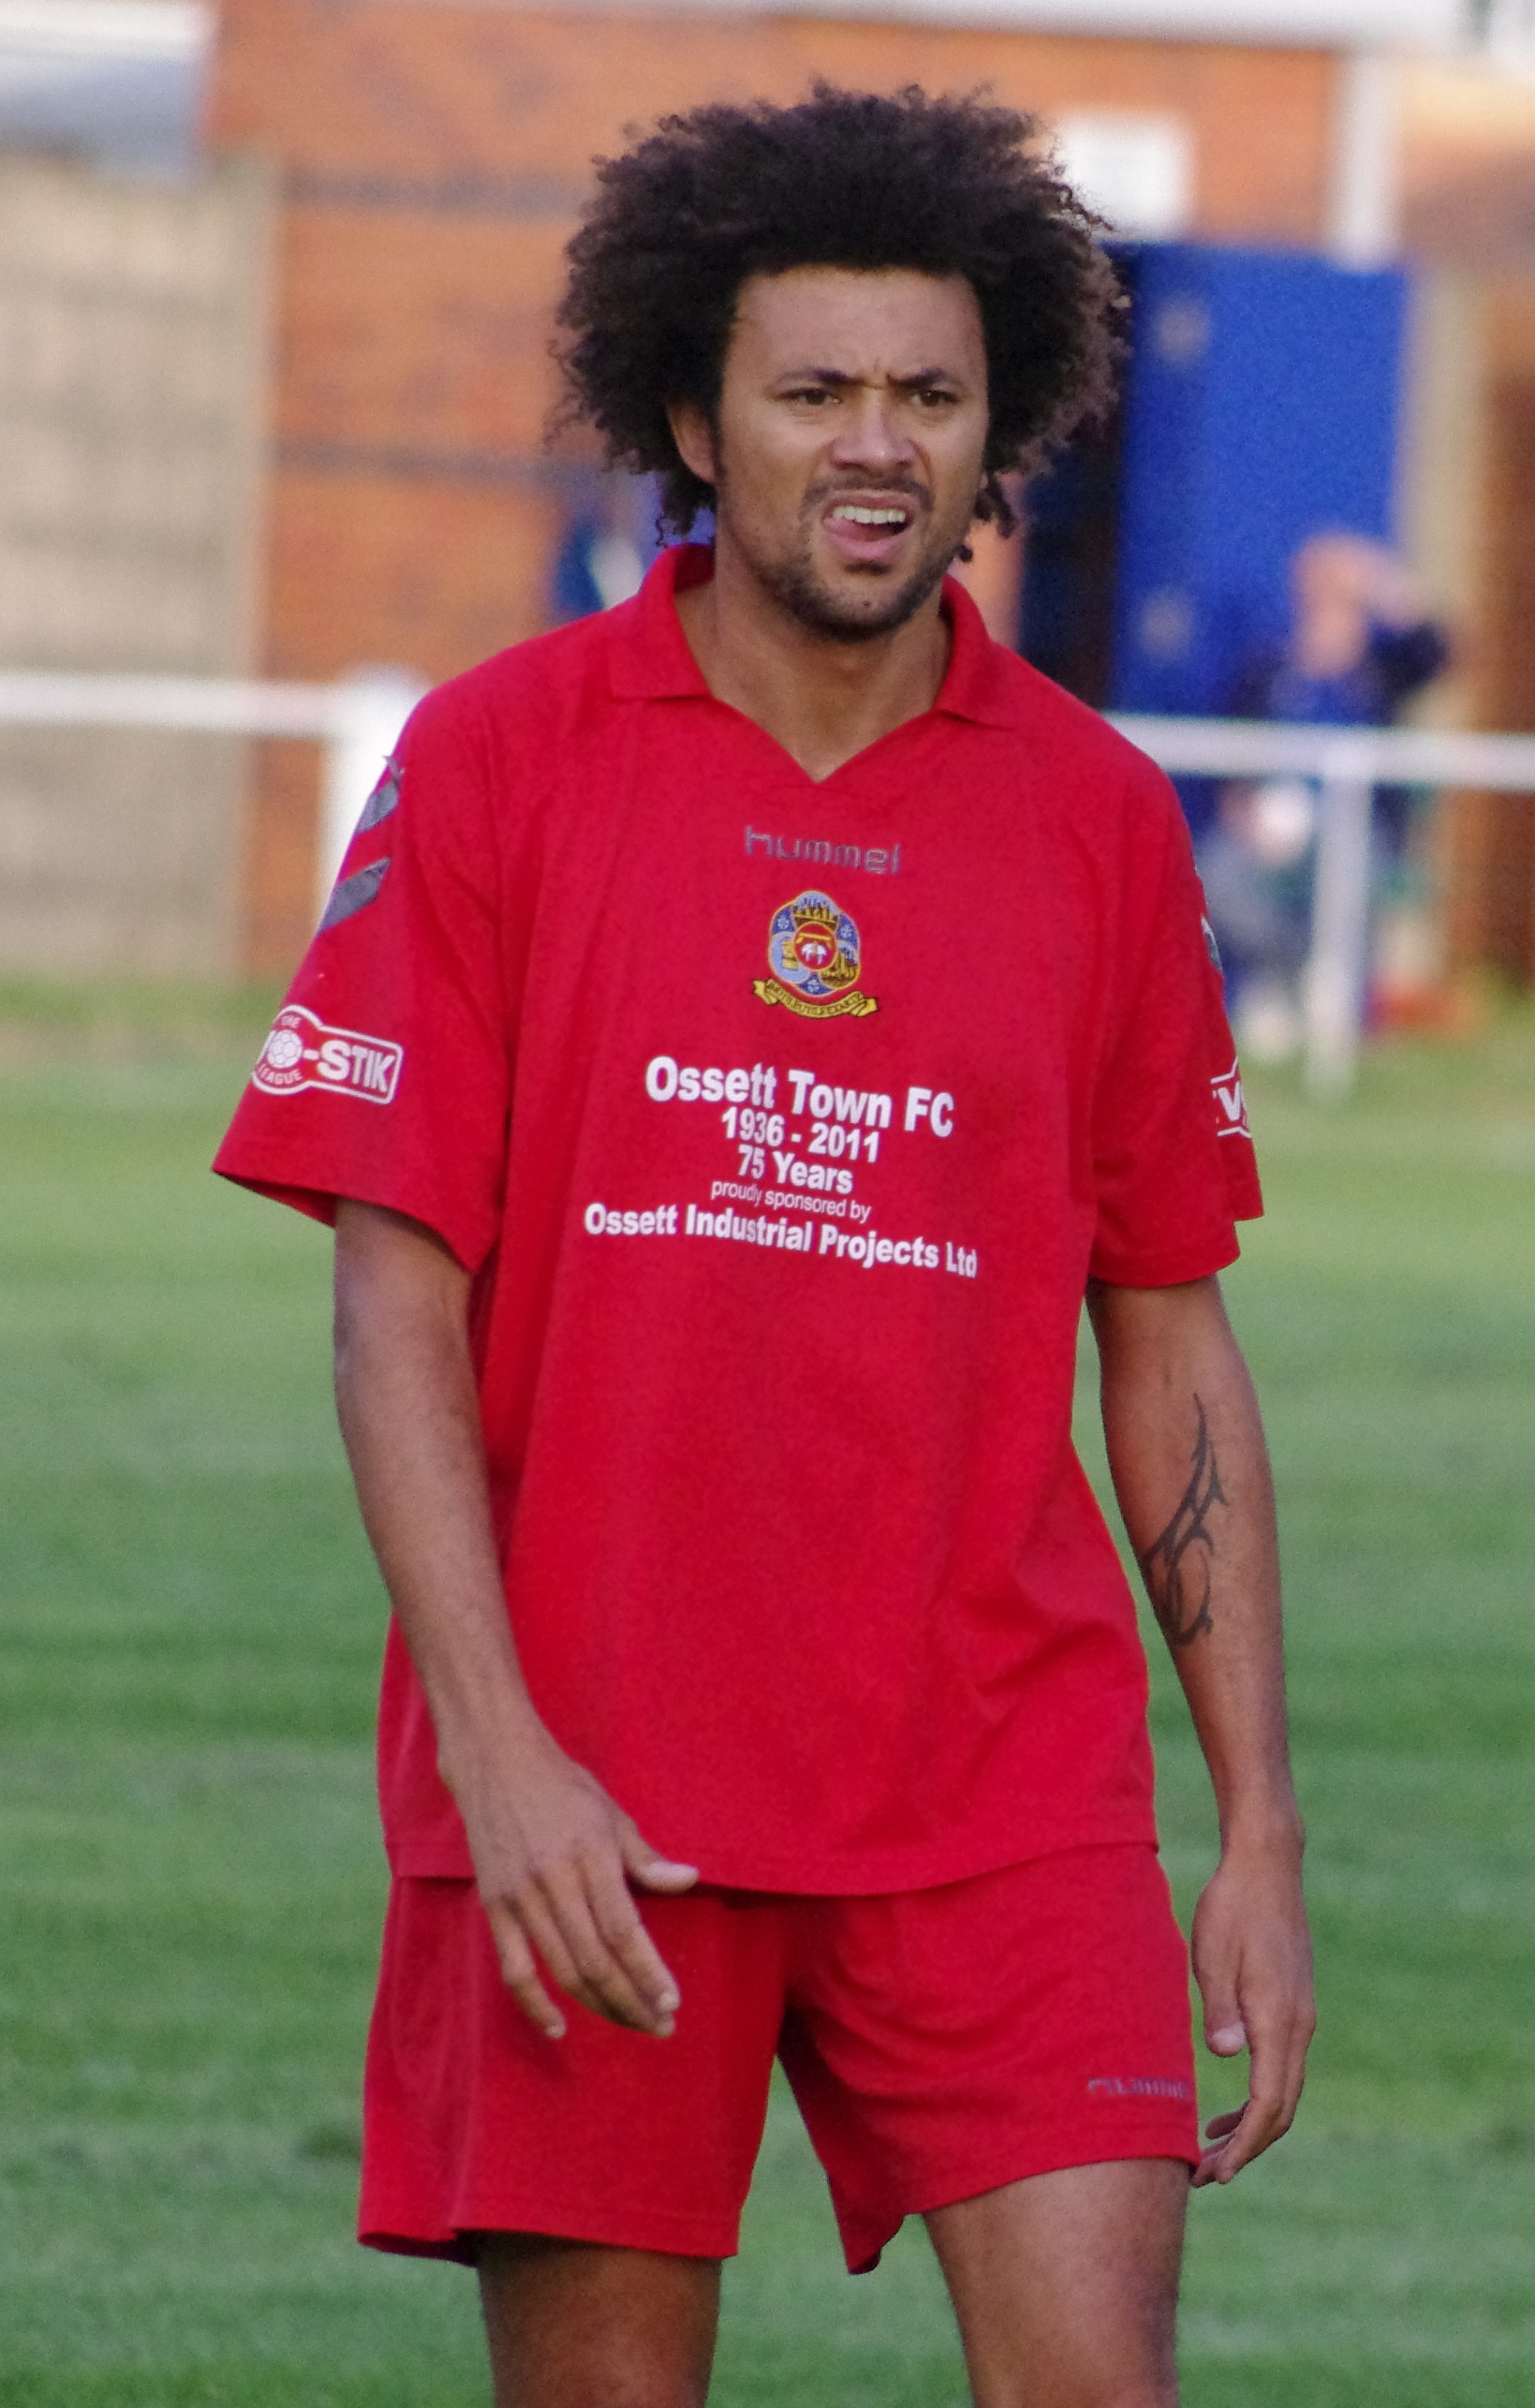 Jason Price has joined Brighouse Town and played in two matches so far